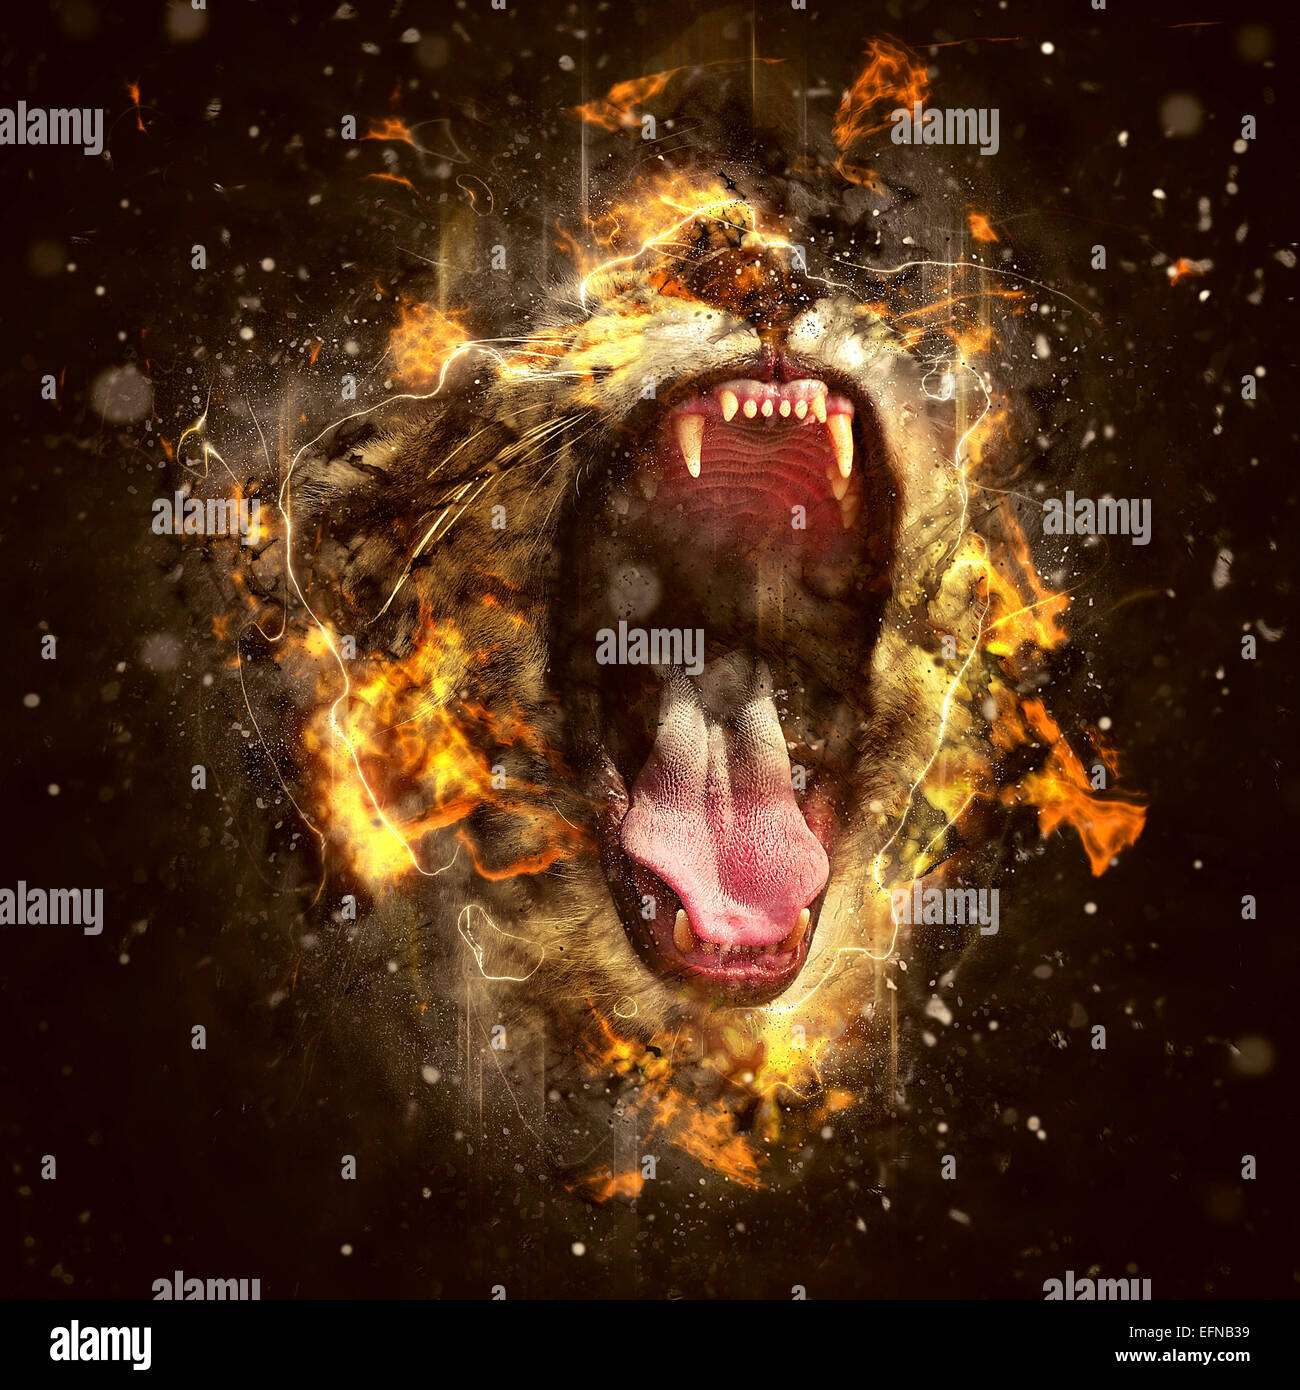 Lion, the King of beasts and the most dangerous animal of the world. Stock Photo